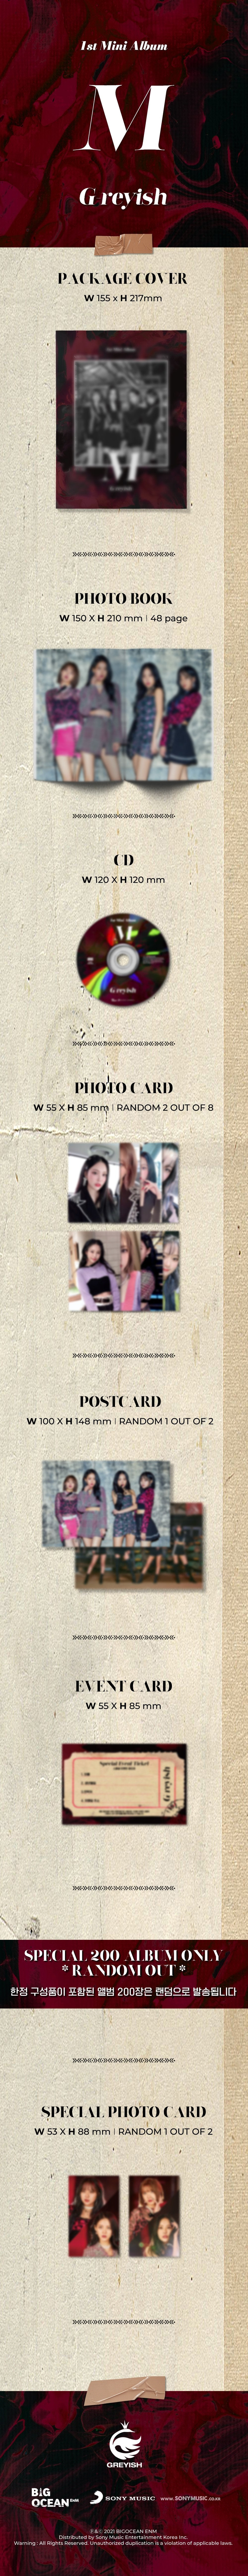 1 CD
1 Photo Book (48 pages)
2 Photo Cards
1 Post Card
1 Event Card